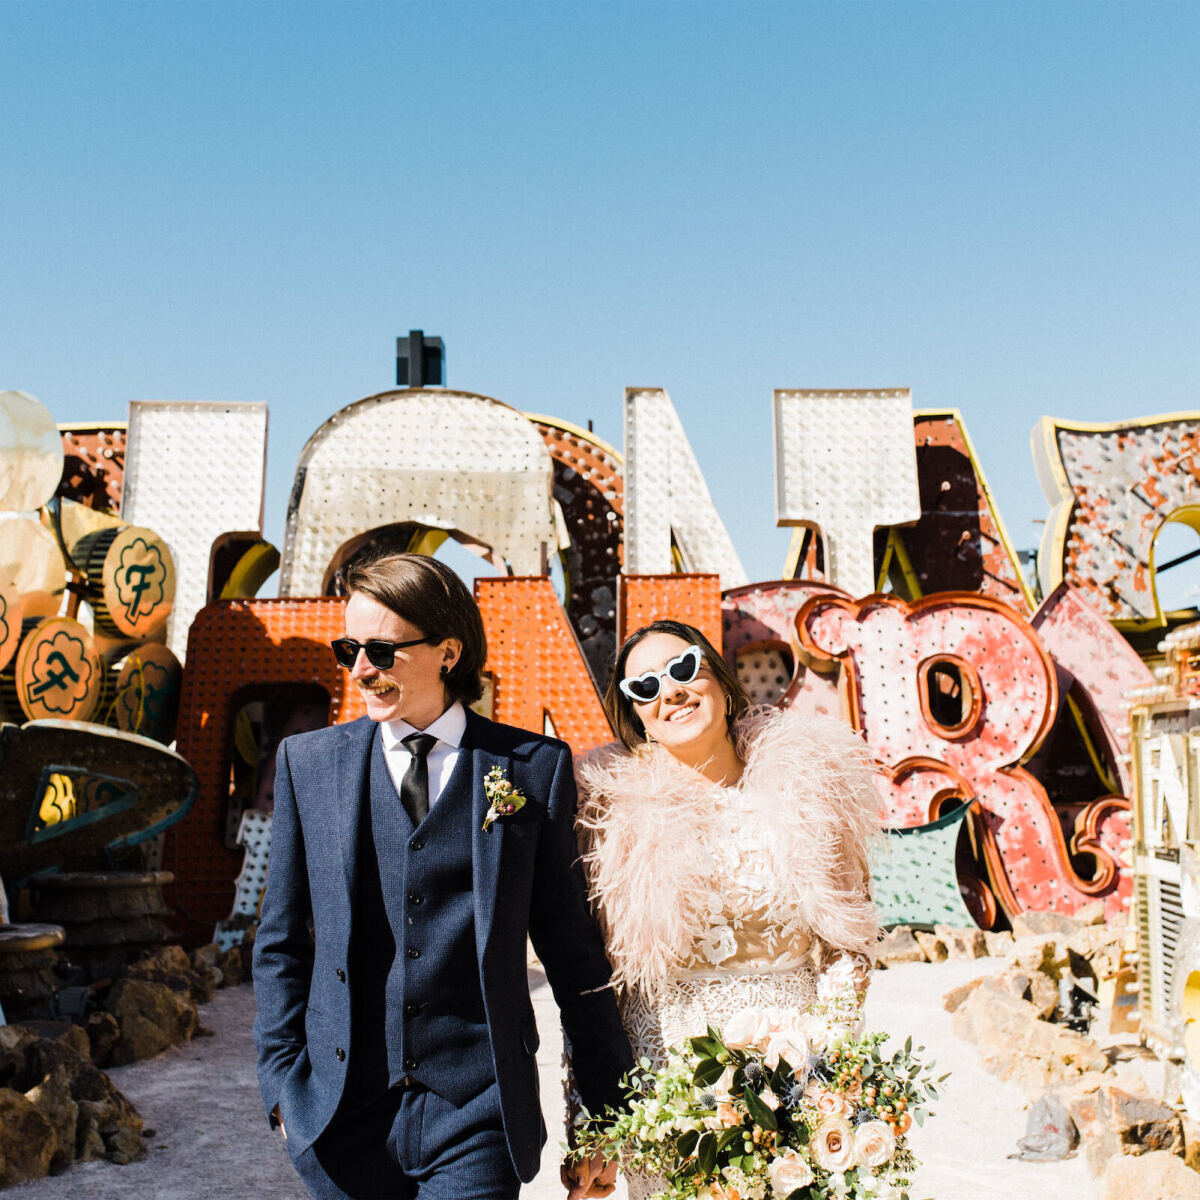 A bride and groom at The Neon Museum in Las Vegas.